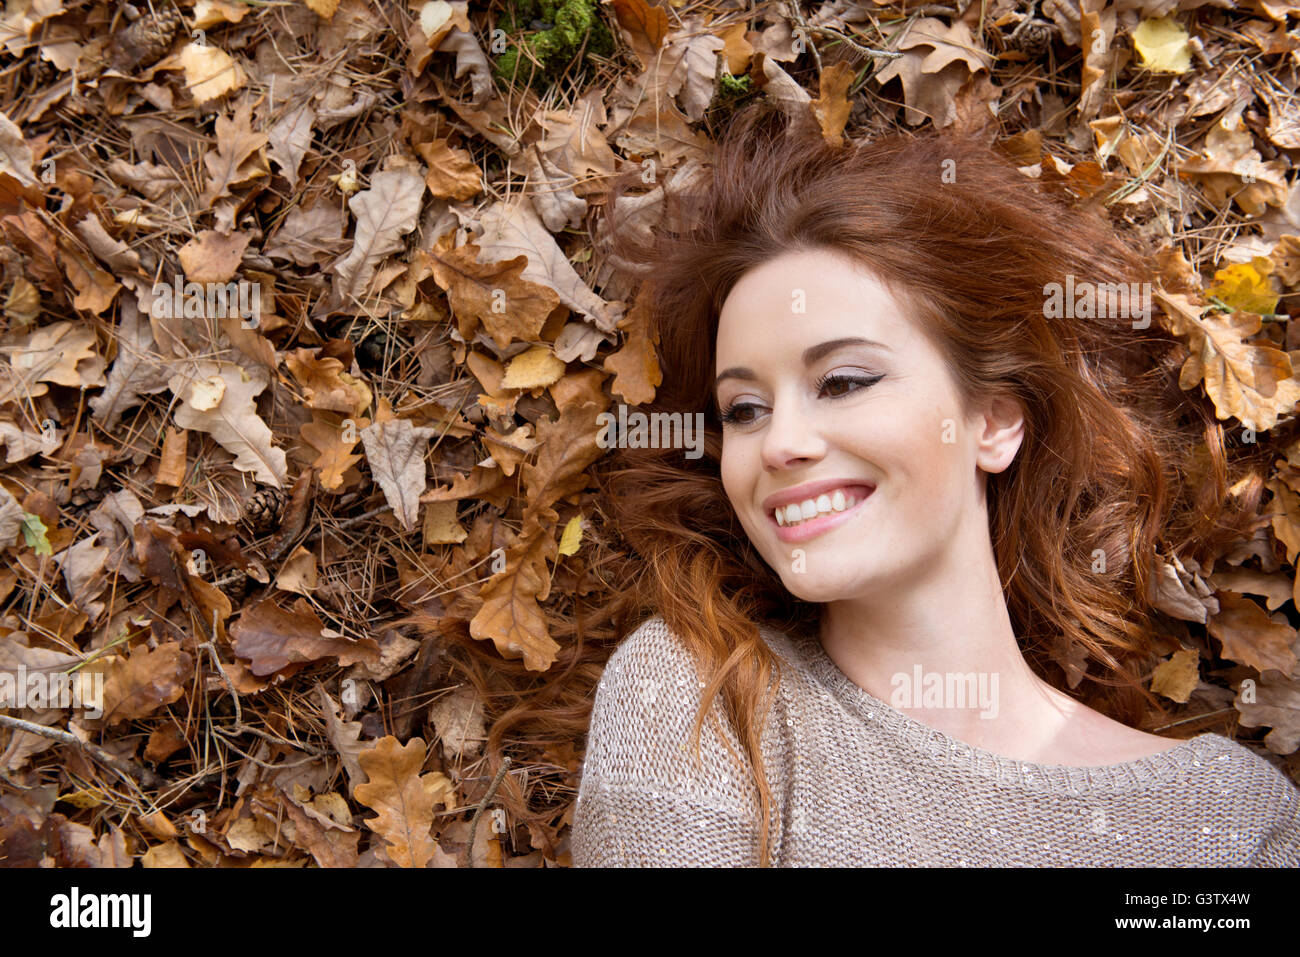 An attractive young woman laying on the forest floor surrounded by leaves. Stock Photo